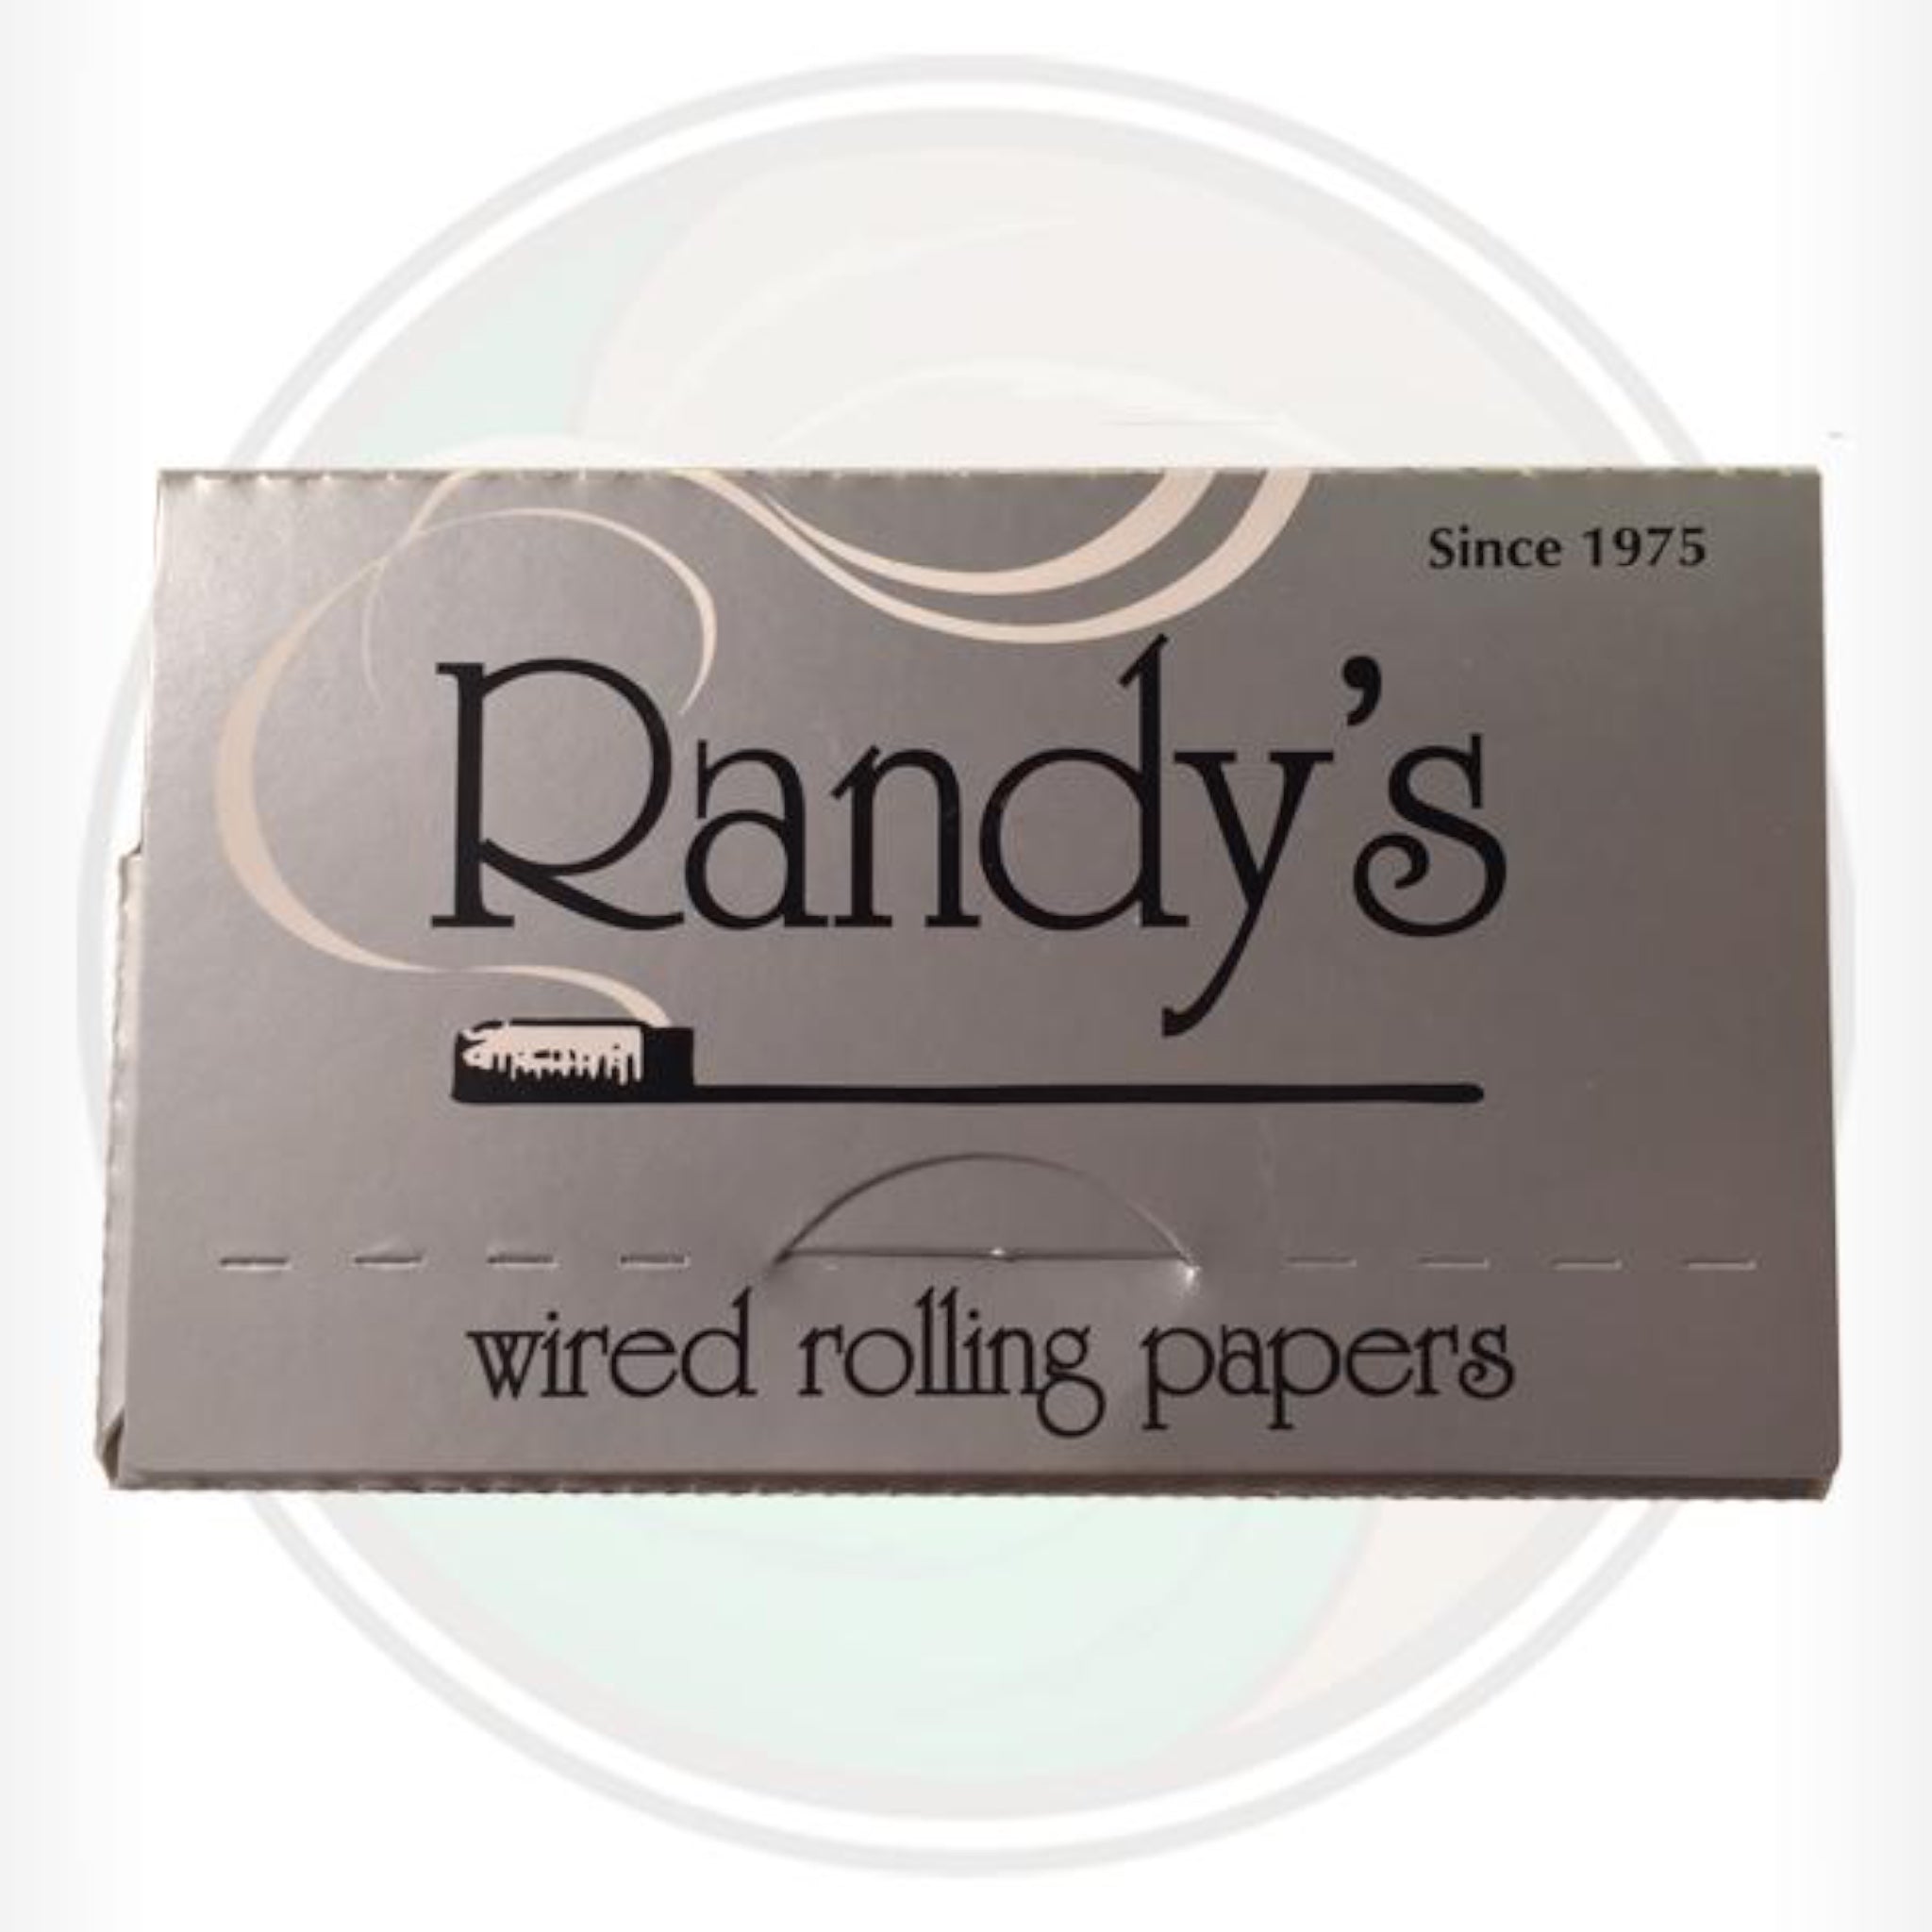 collection of Randy's Wired Rolling Papers